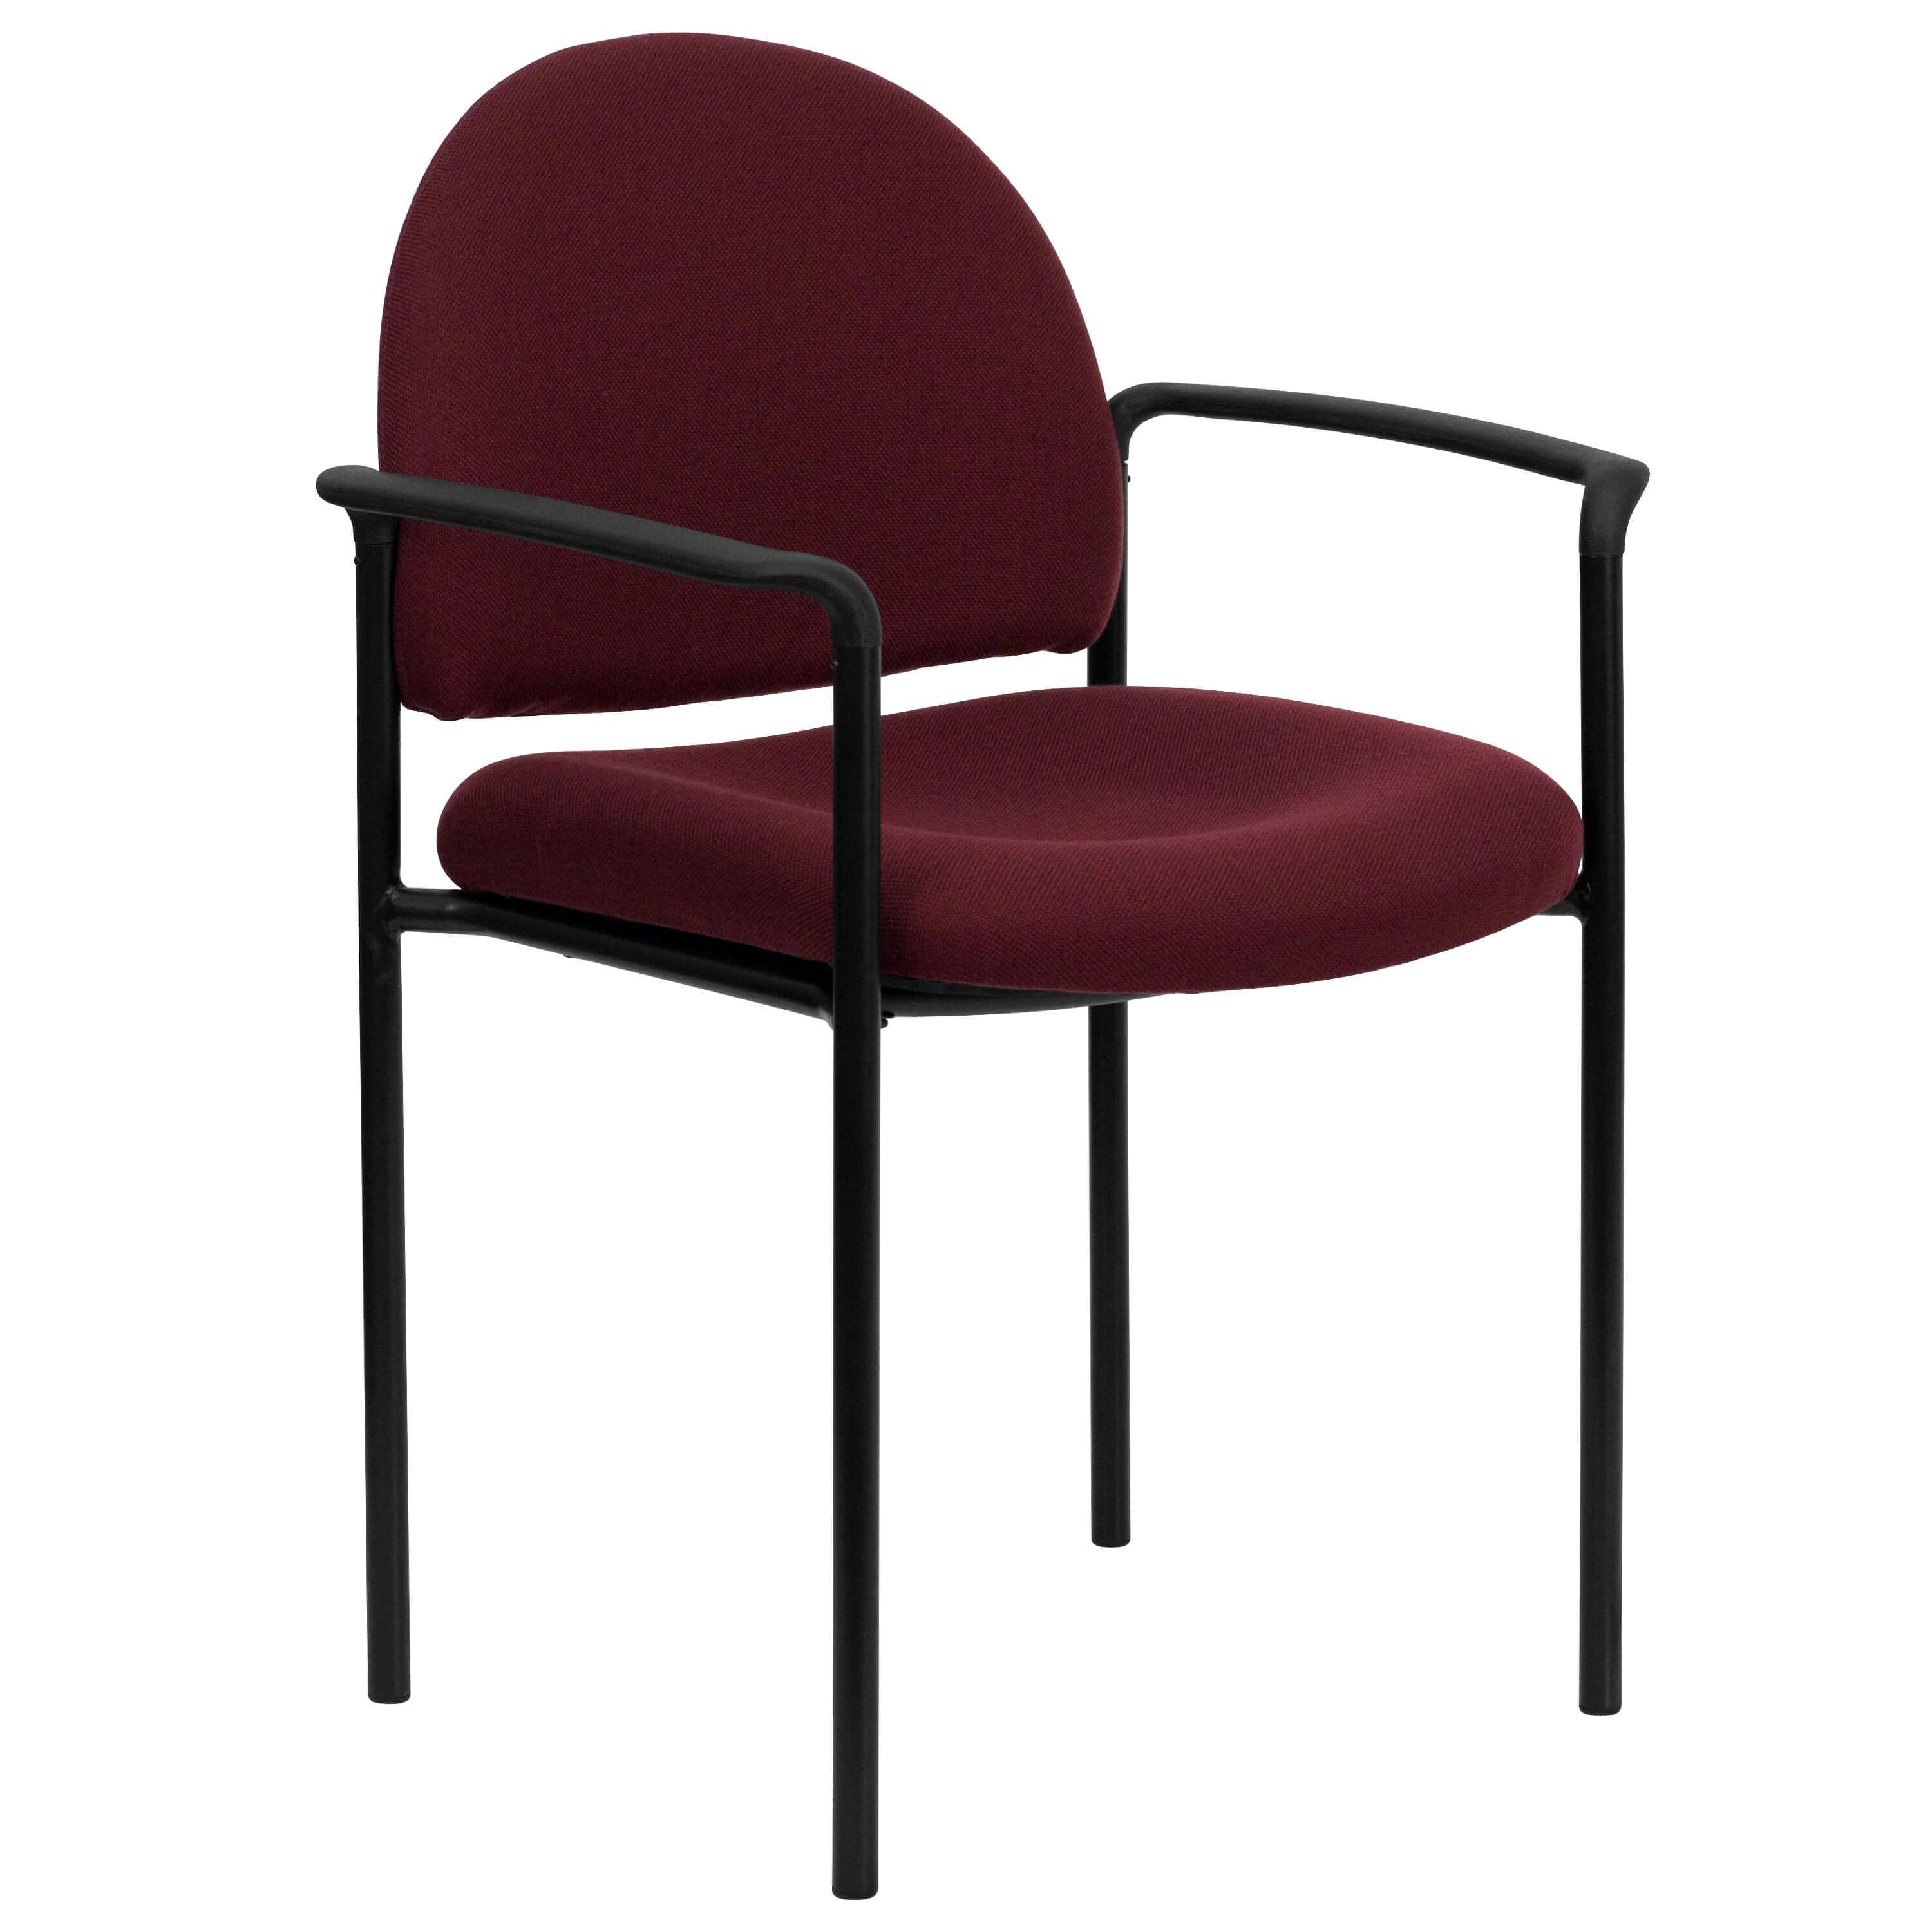 Stackable chairs CUB BT 516 1 BY GG FLA